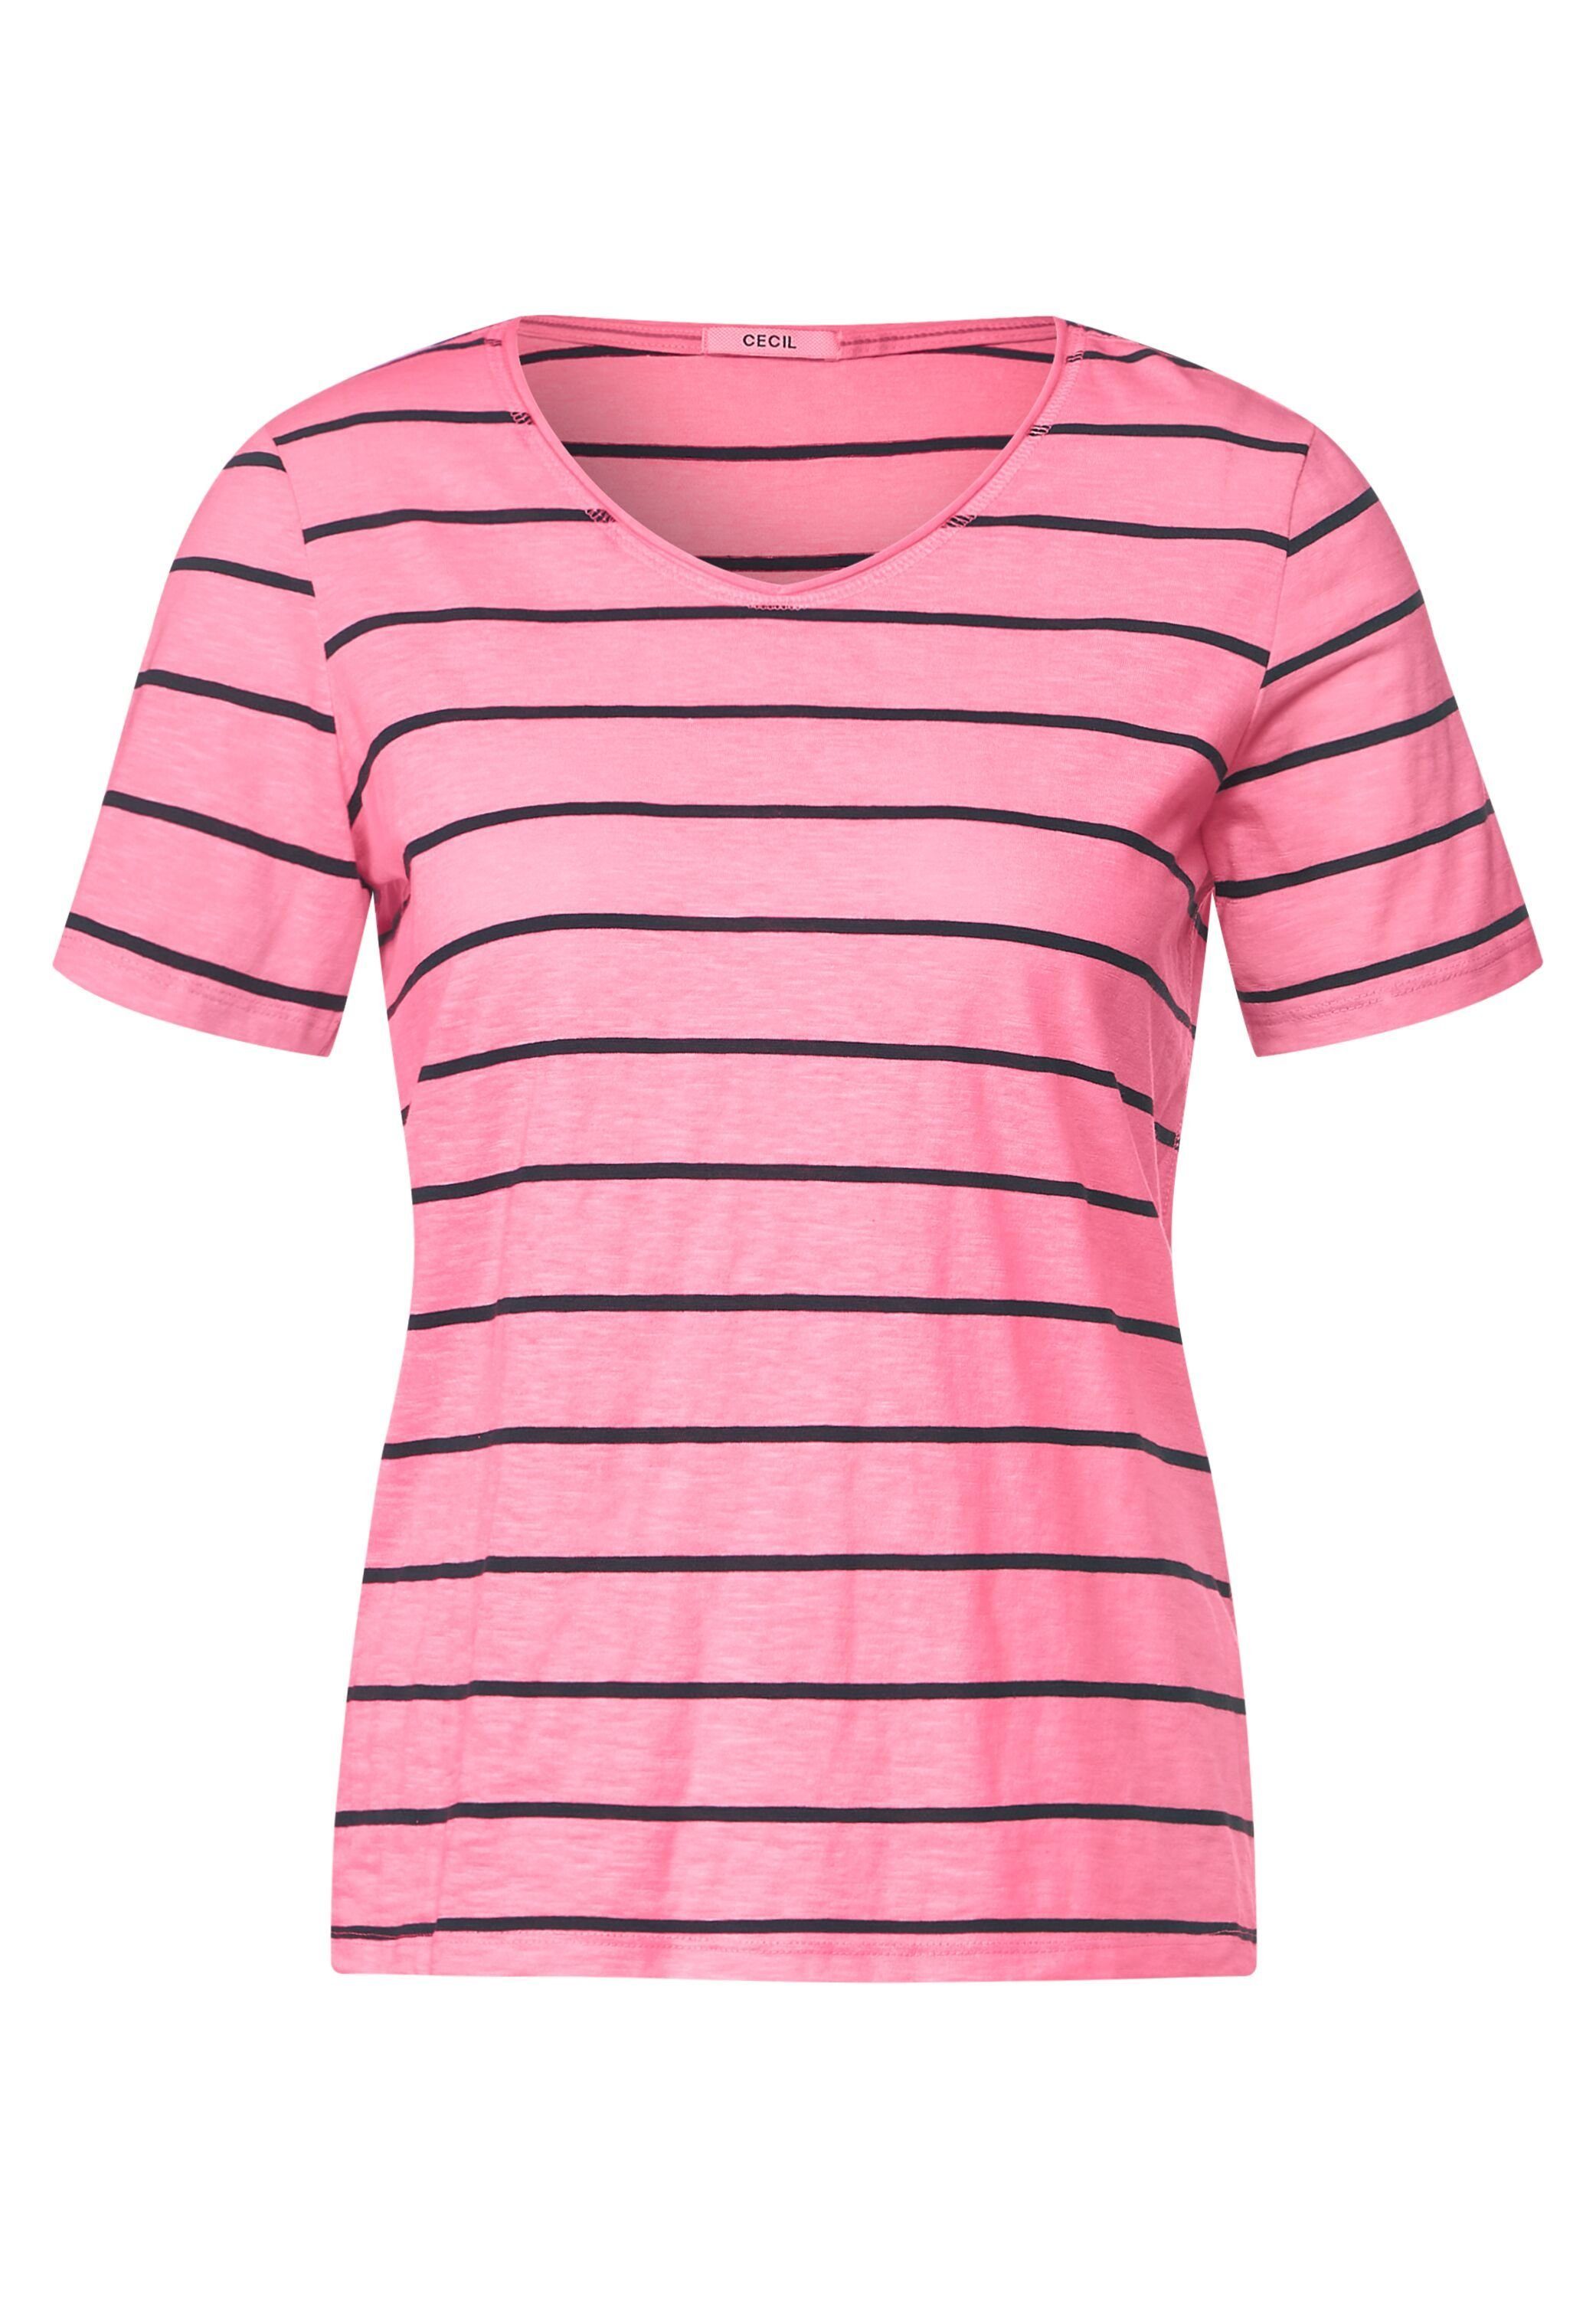 Tolles Angebot!! Cecil T-Shirt soft pink